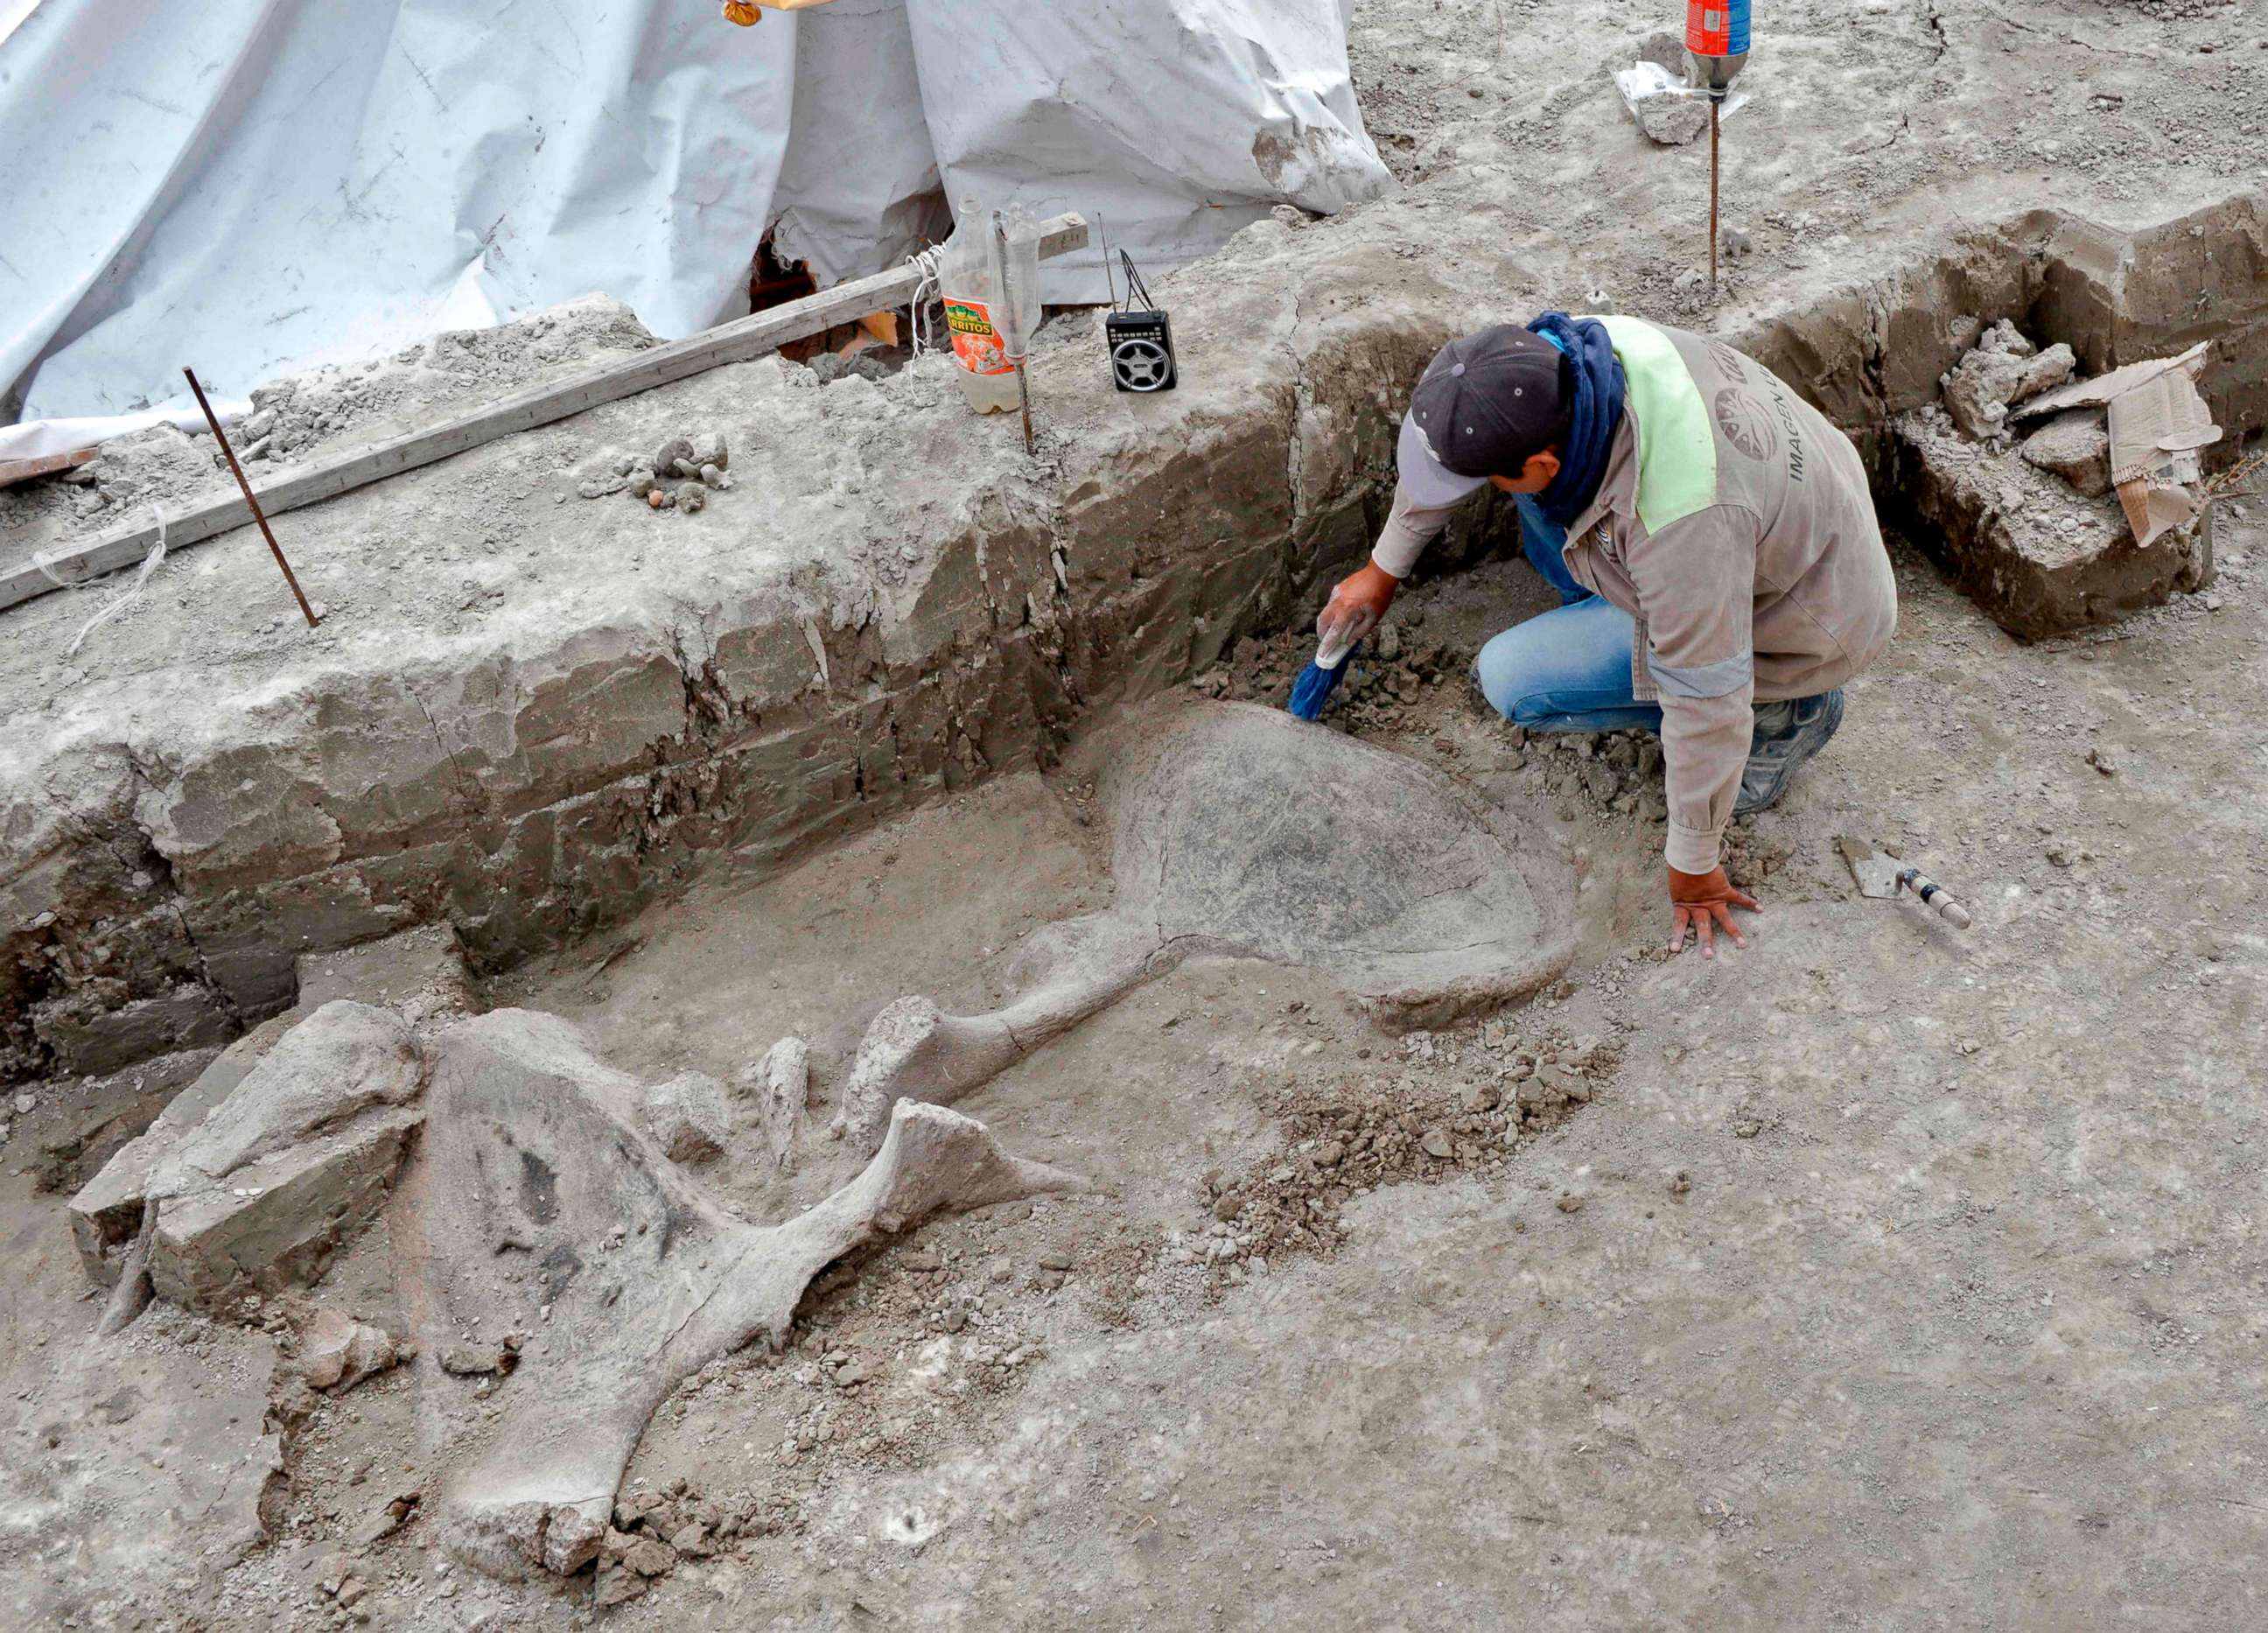 PHOTO: An expert works on mammoth bones found in what is believed to be the first mammoth trap set by humans, in Tultepec, Mexico, in a photo released by Mexico's National Institute of Anthropology (INAH).